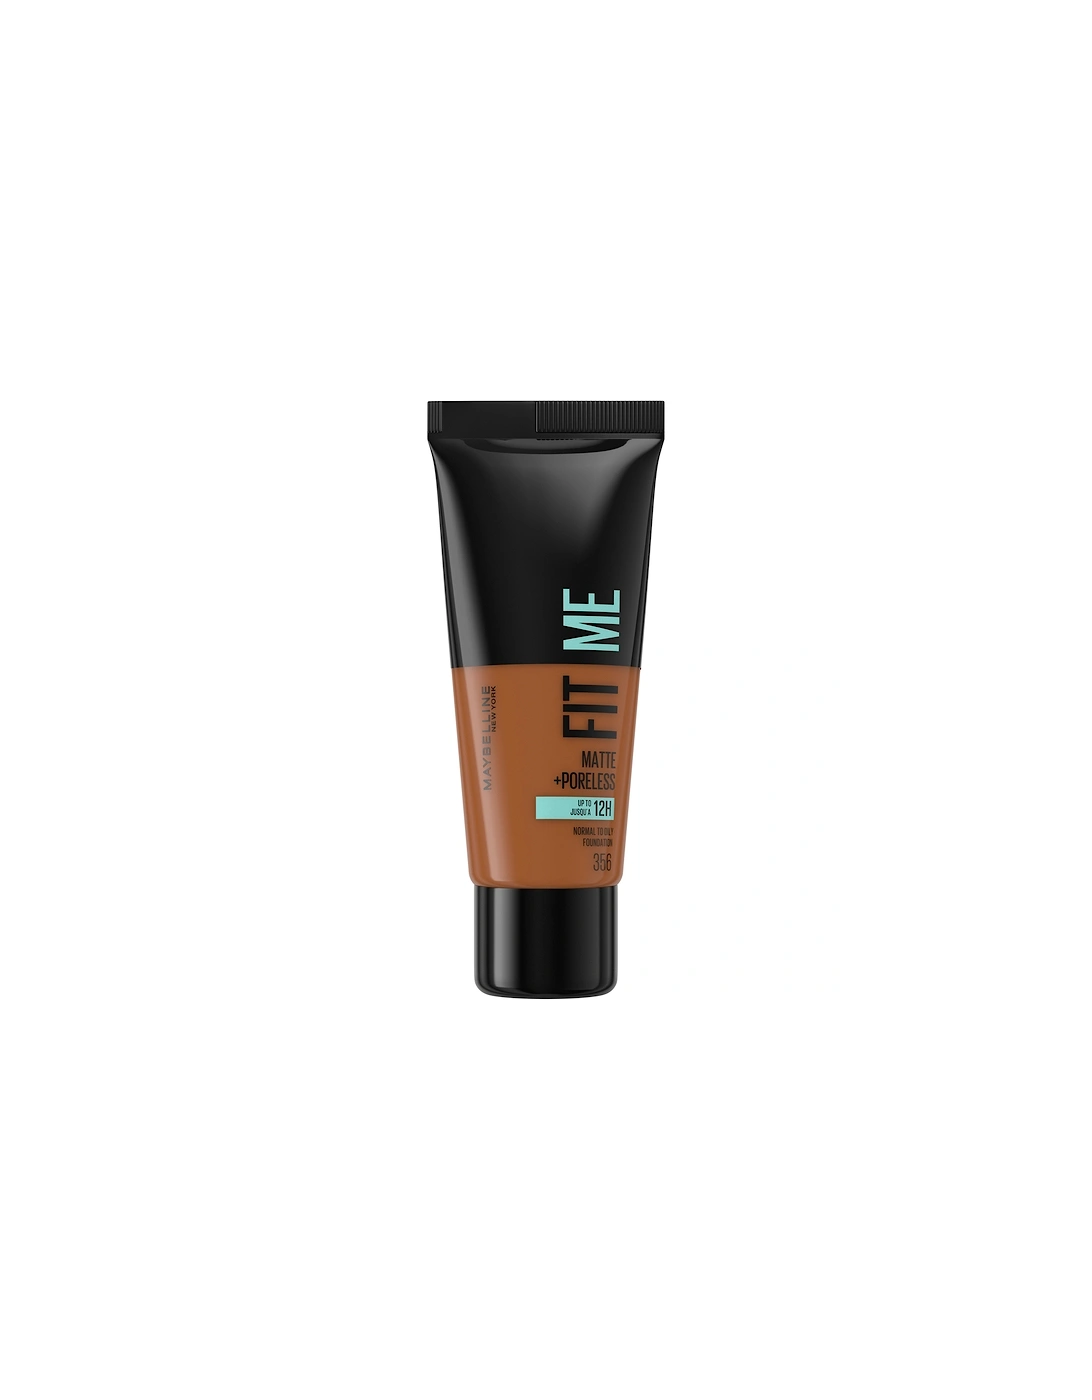 Fit Me! Matte and Poreless Foundation - 356 Warm Coconut - - Fit Me! Matte and Poreless Foundation 30ml (Various Shades) - Foundation - Fit Me! Matte and Poreless Foundation 30ml (Various Shades) - Tina - Fit Me! Matte and Poreless Foundation 30ml (Various Shades) - Jo, 2 of 1